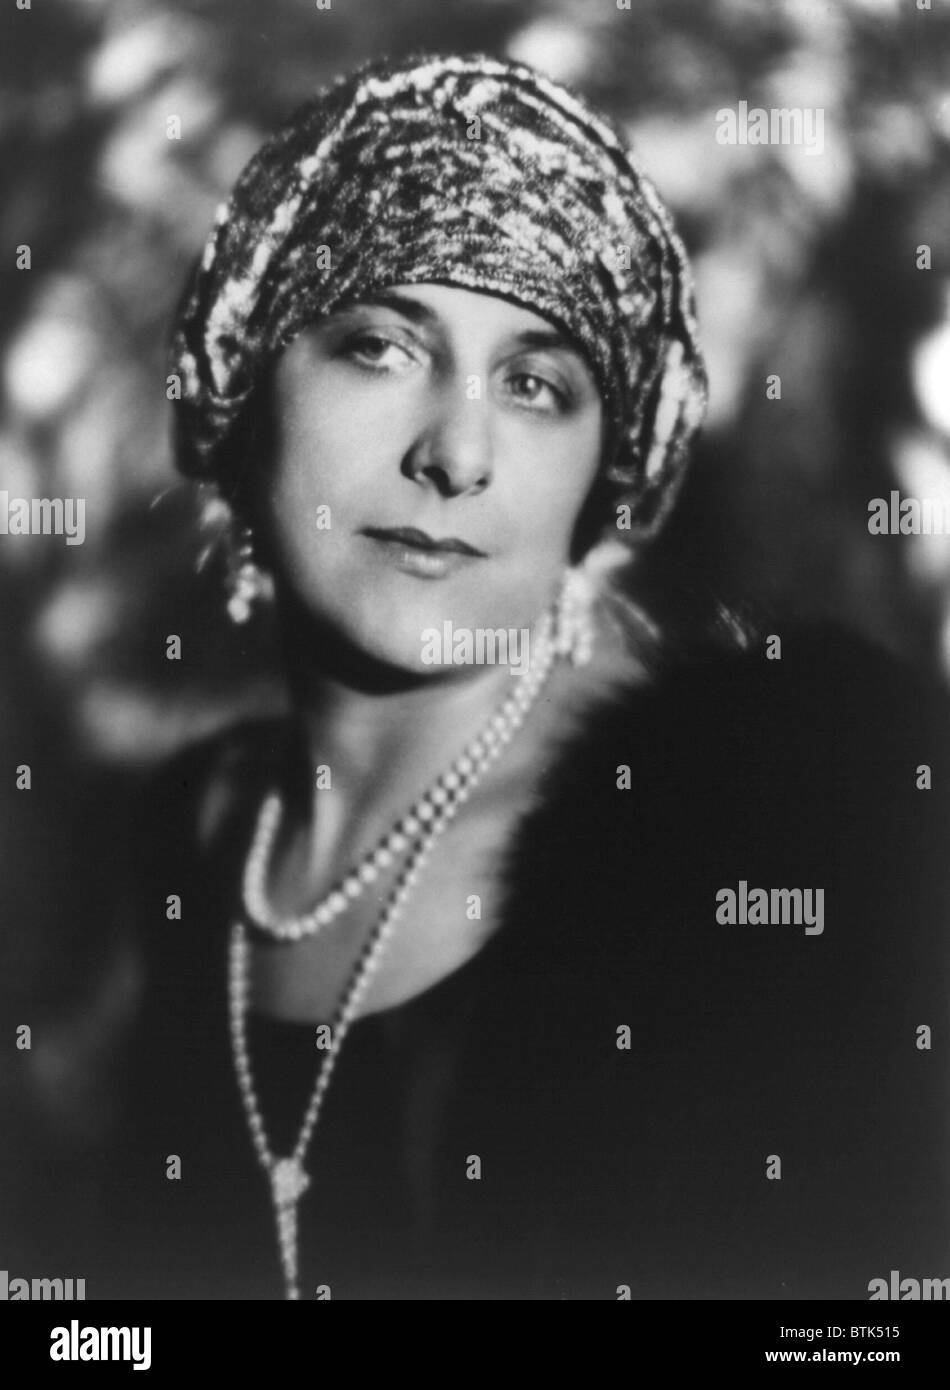 Diva 1920s High Resolution Stock Photography and Images - Alamy